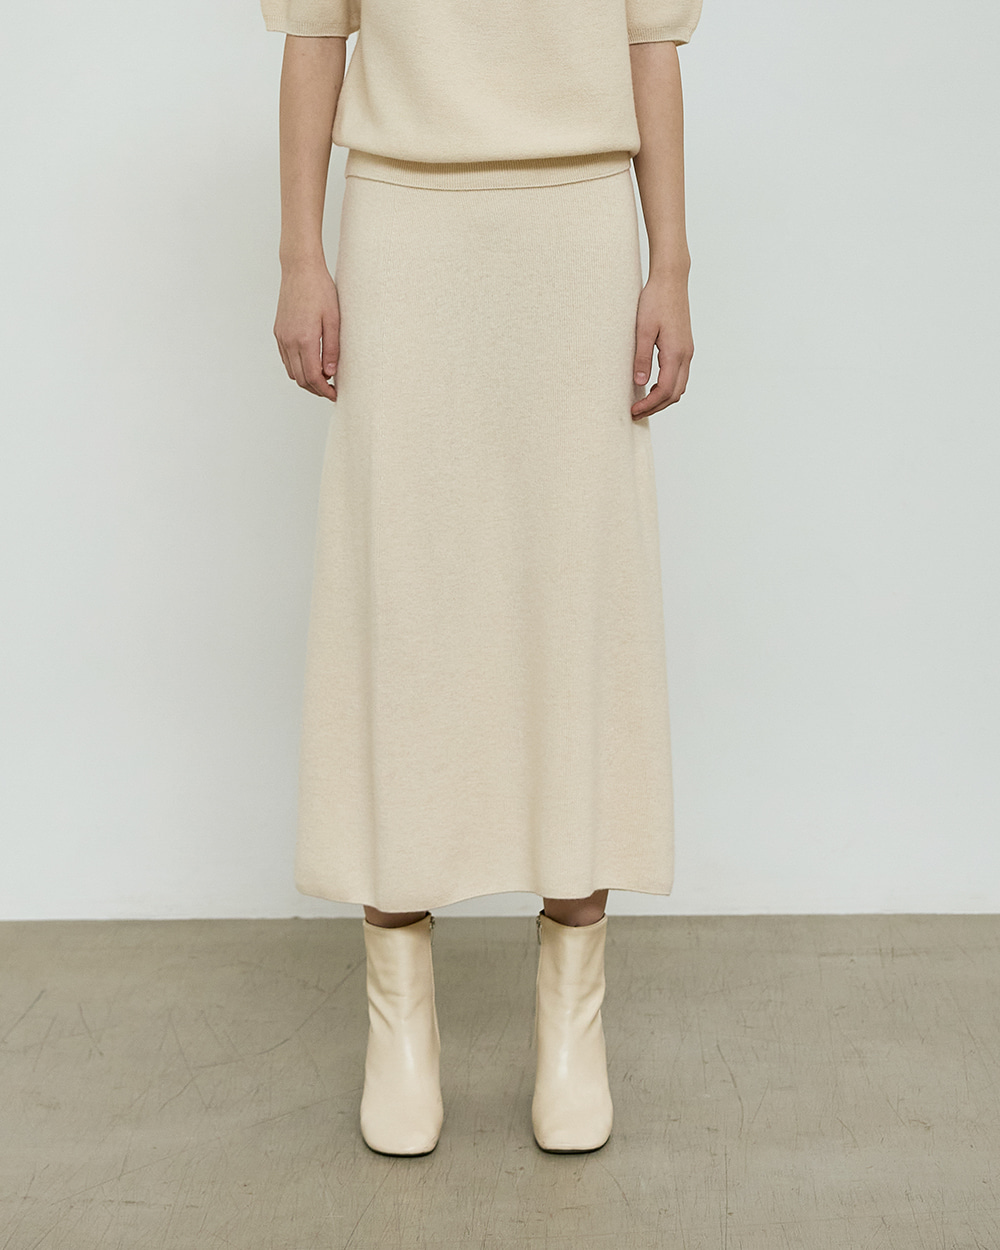 [Clearance Sale] Wholegarment Fiver Skirt